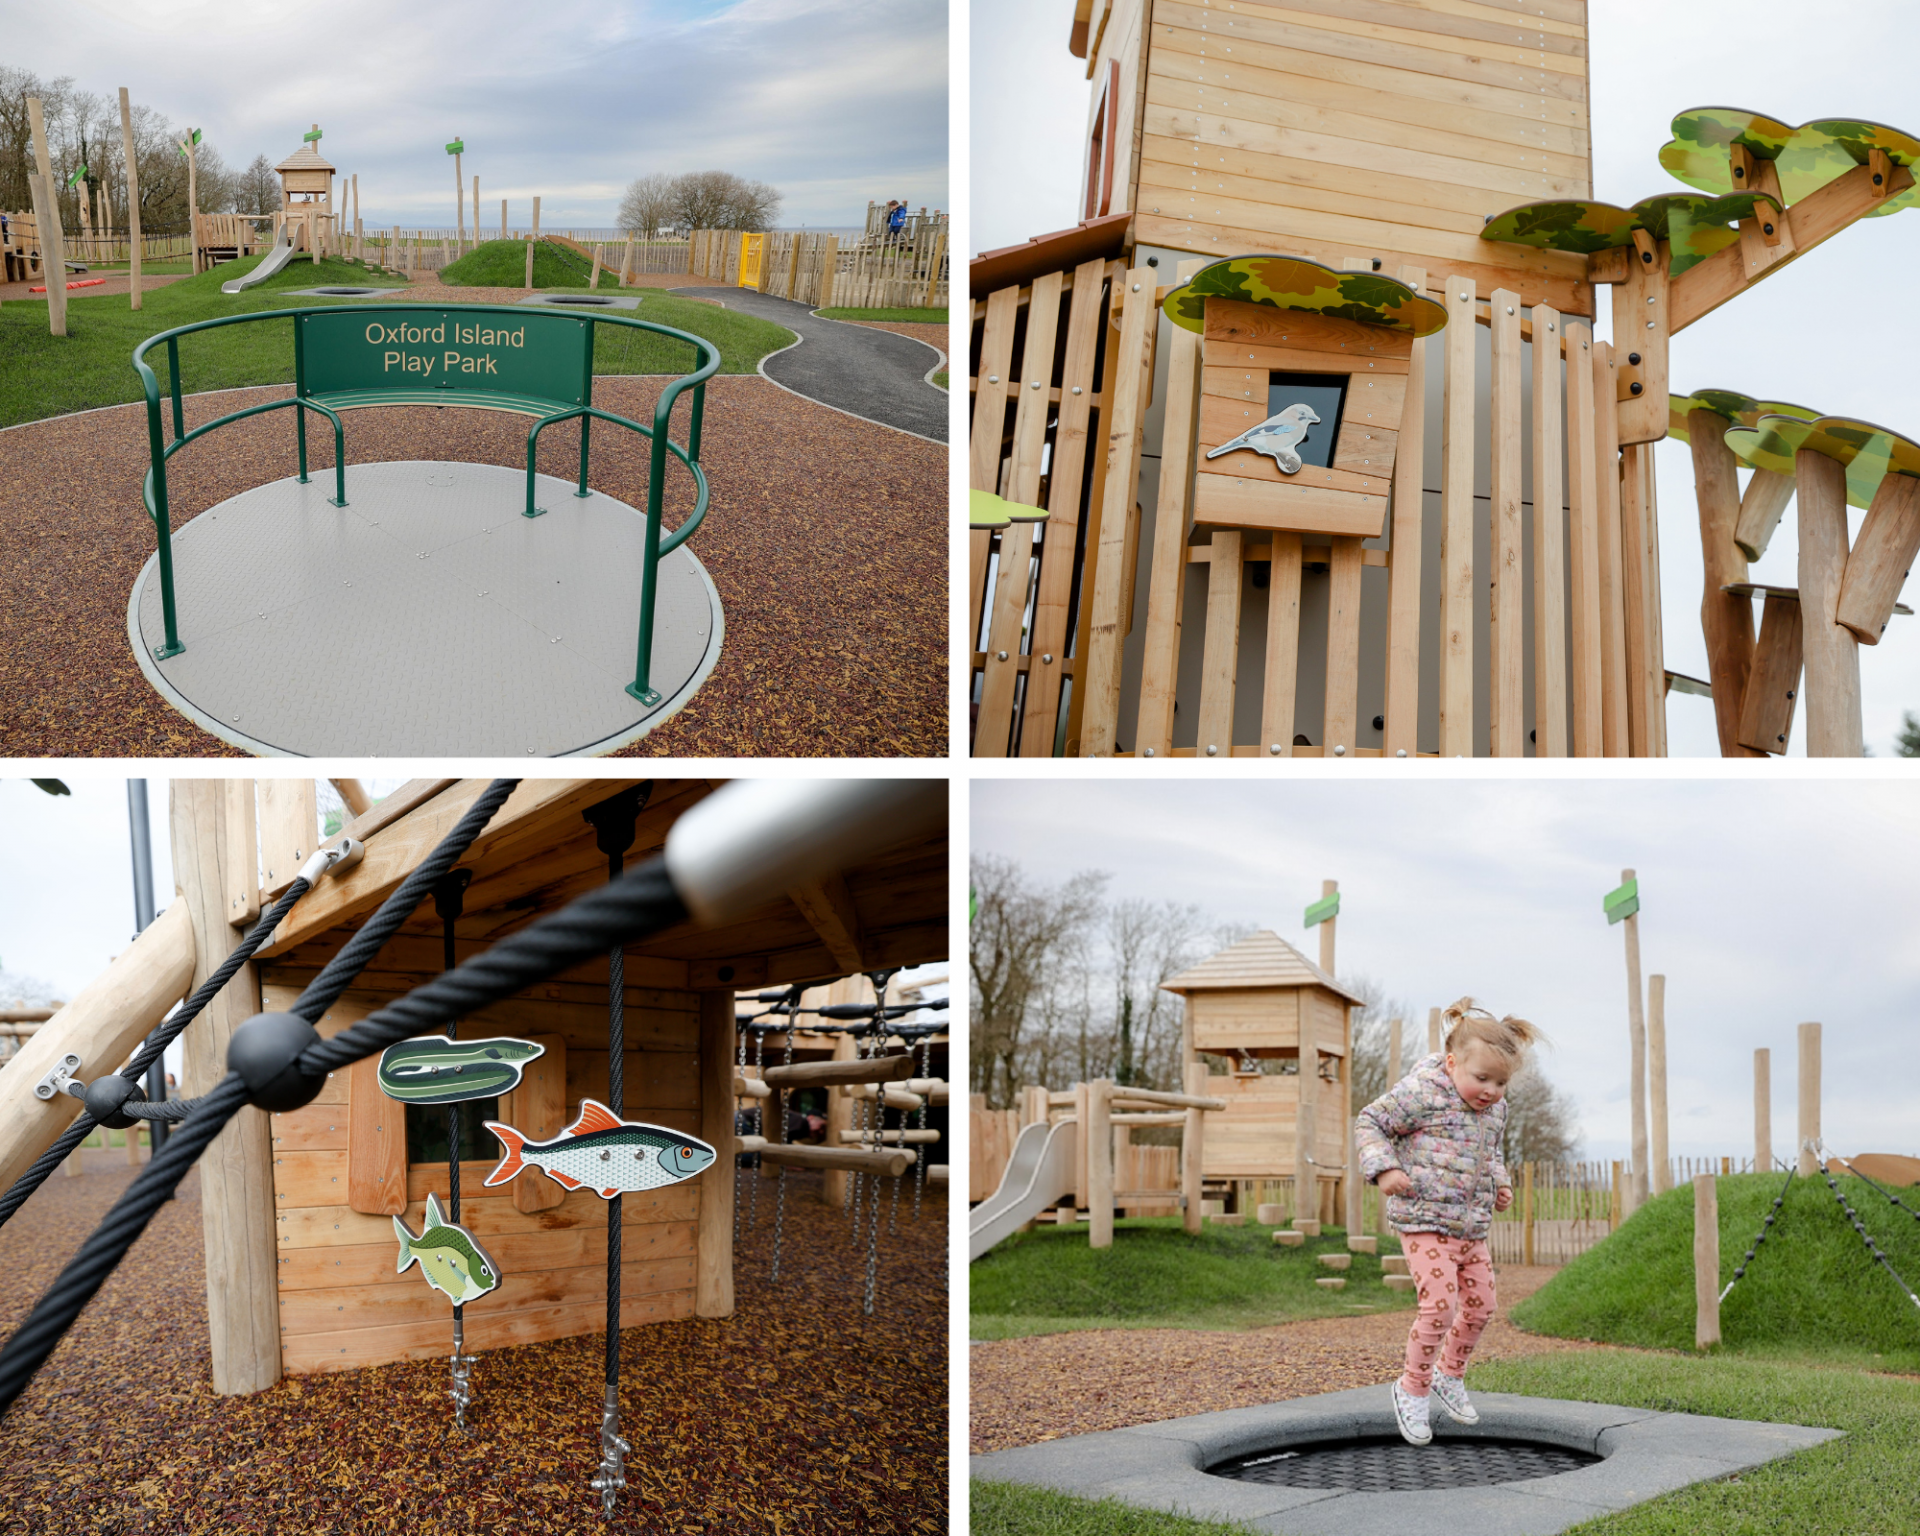 Opened to the public earlier in the year and enjoyed by families far and wide, the new Oxford Island play park was officially opened by Lord Mayor Councillor Paul Greenfield along with the help of contractors, elected members and council officials.